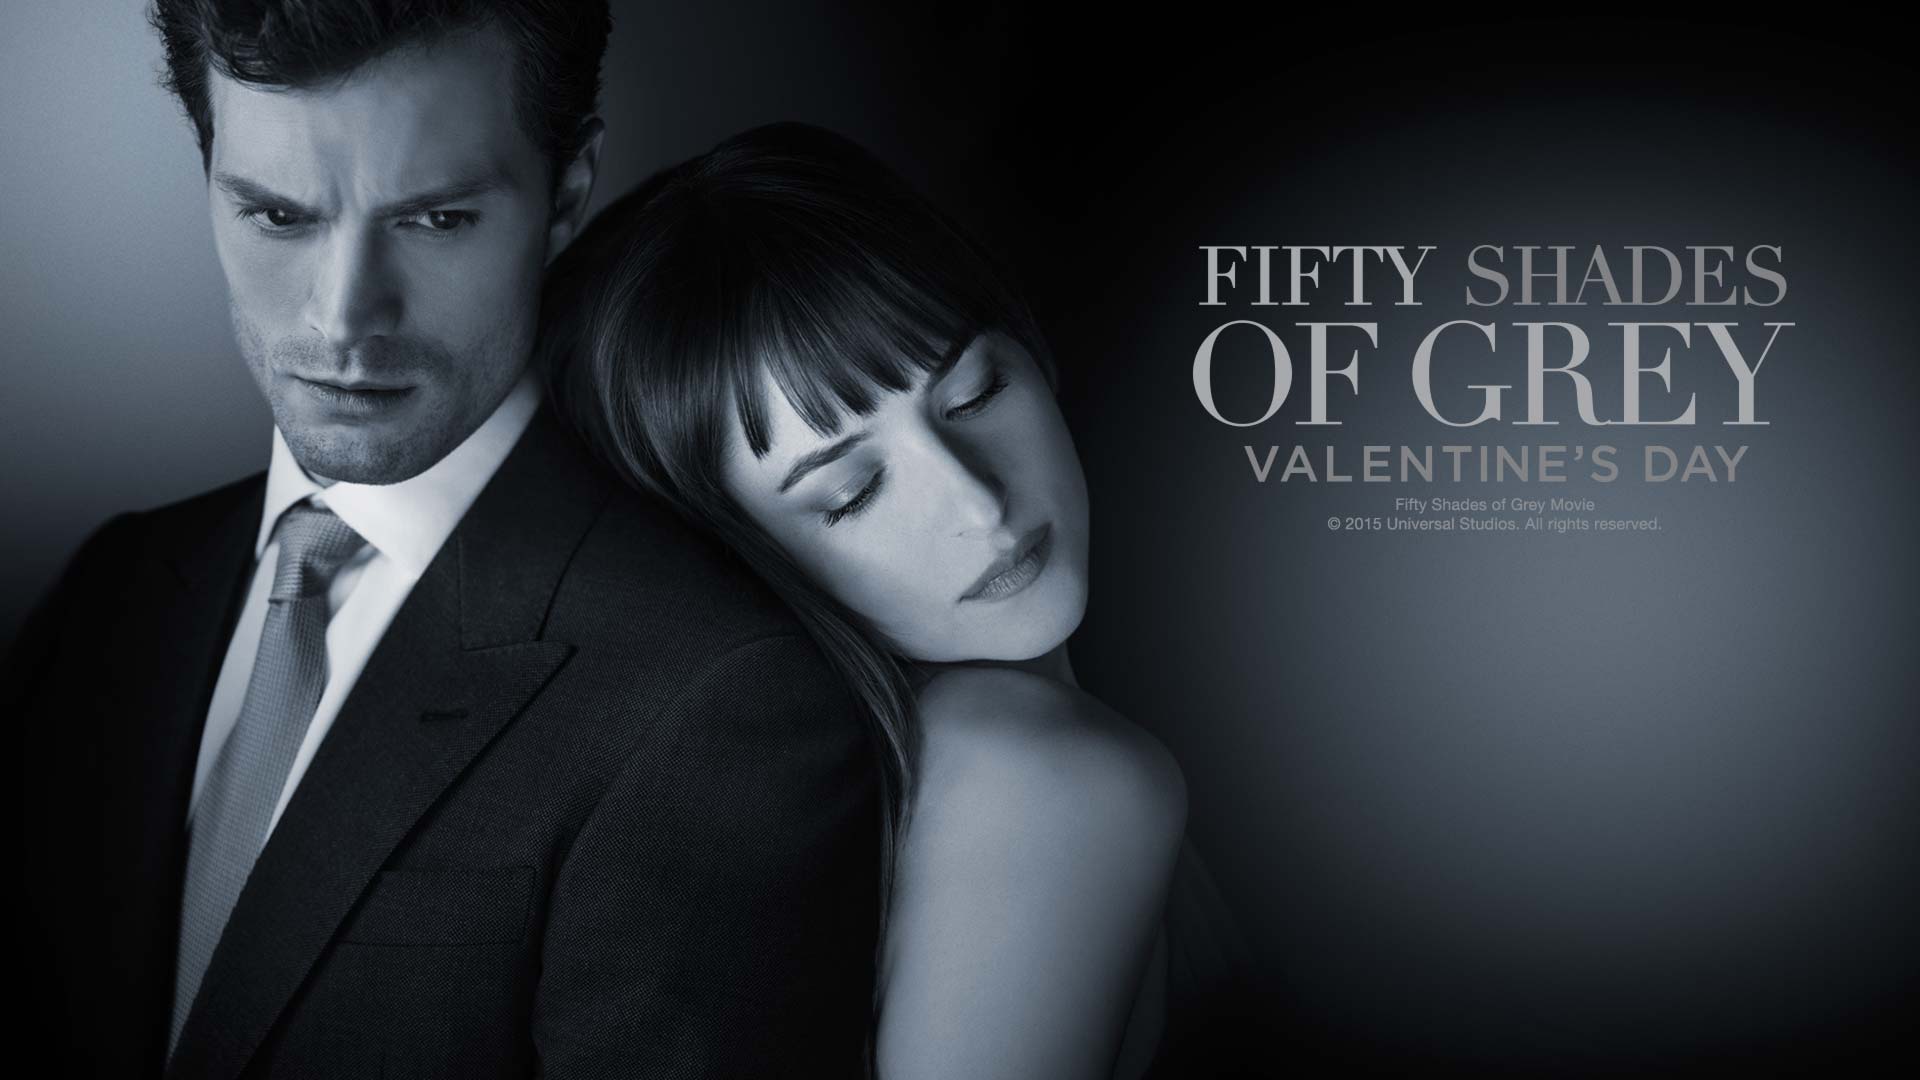 http://opi.com/sites/default/files/collection-fiftyshades-gallery_0.jpg